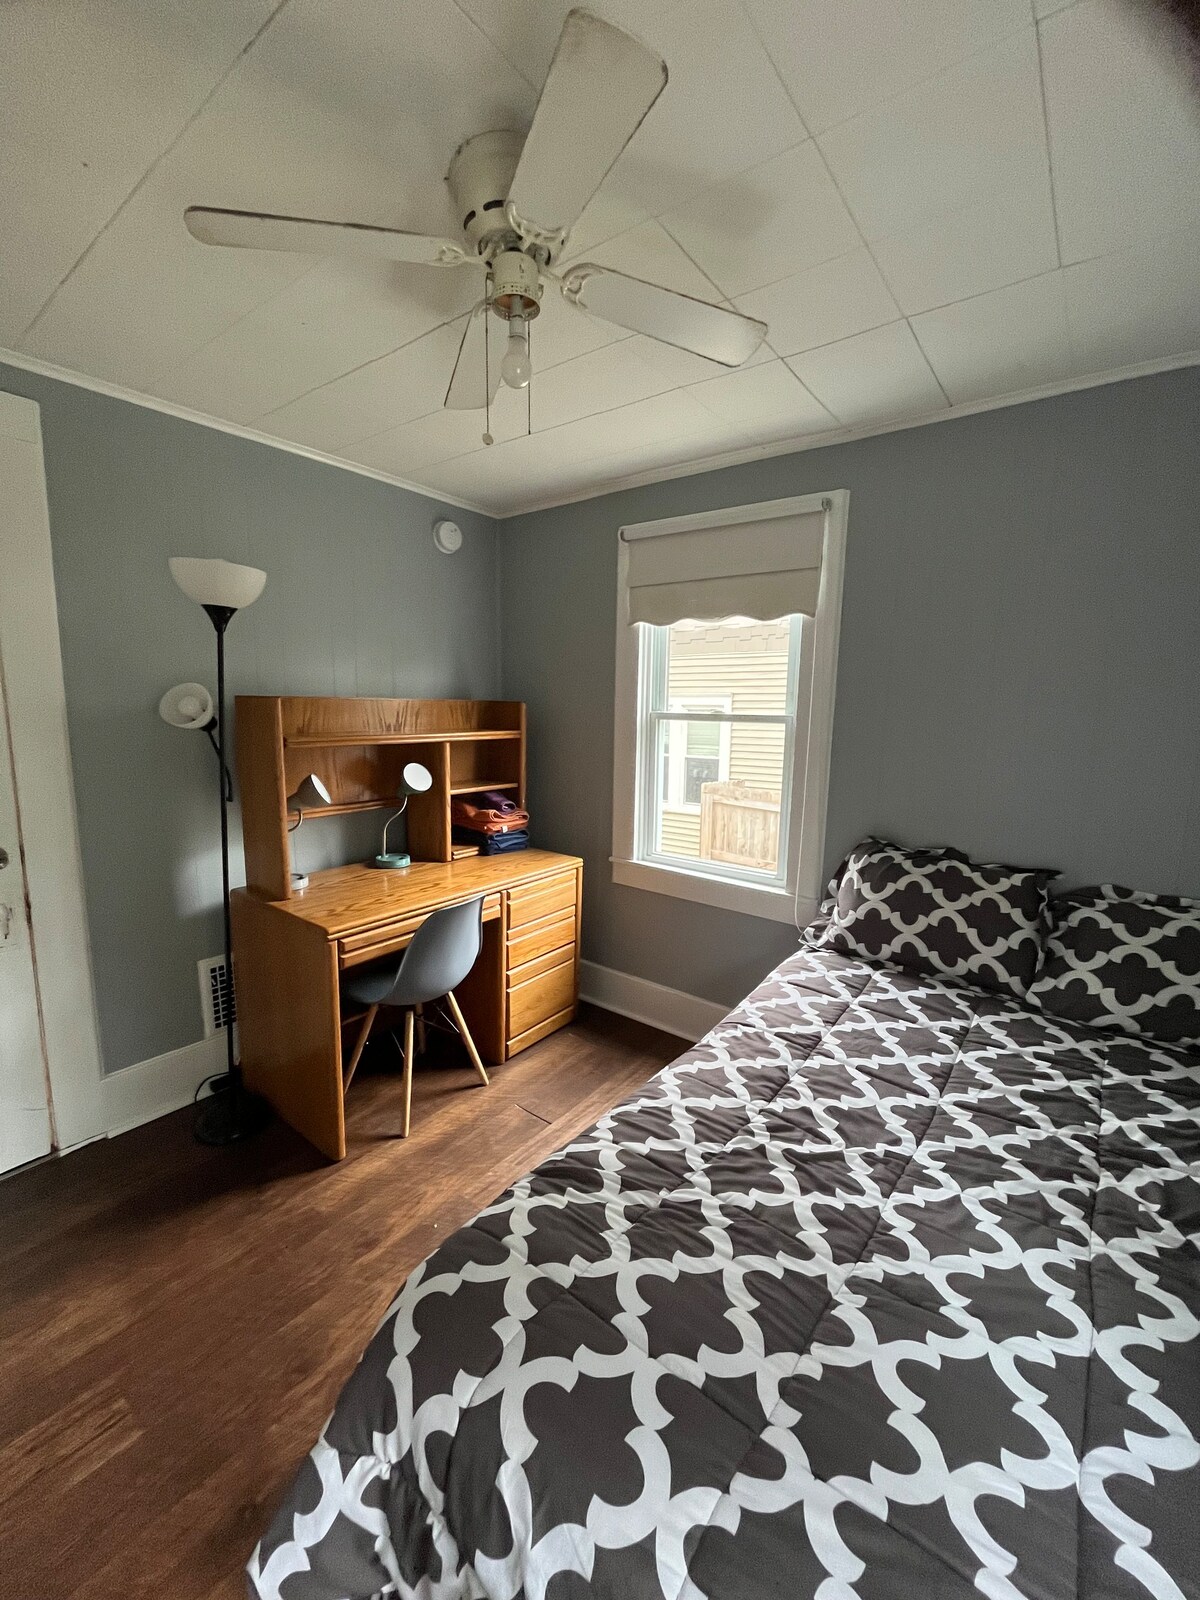 Another Simple bedroom in Syracuse University area